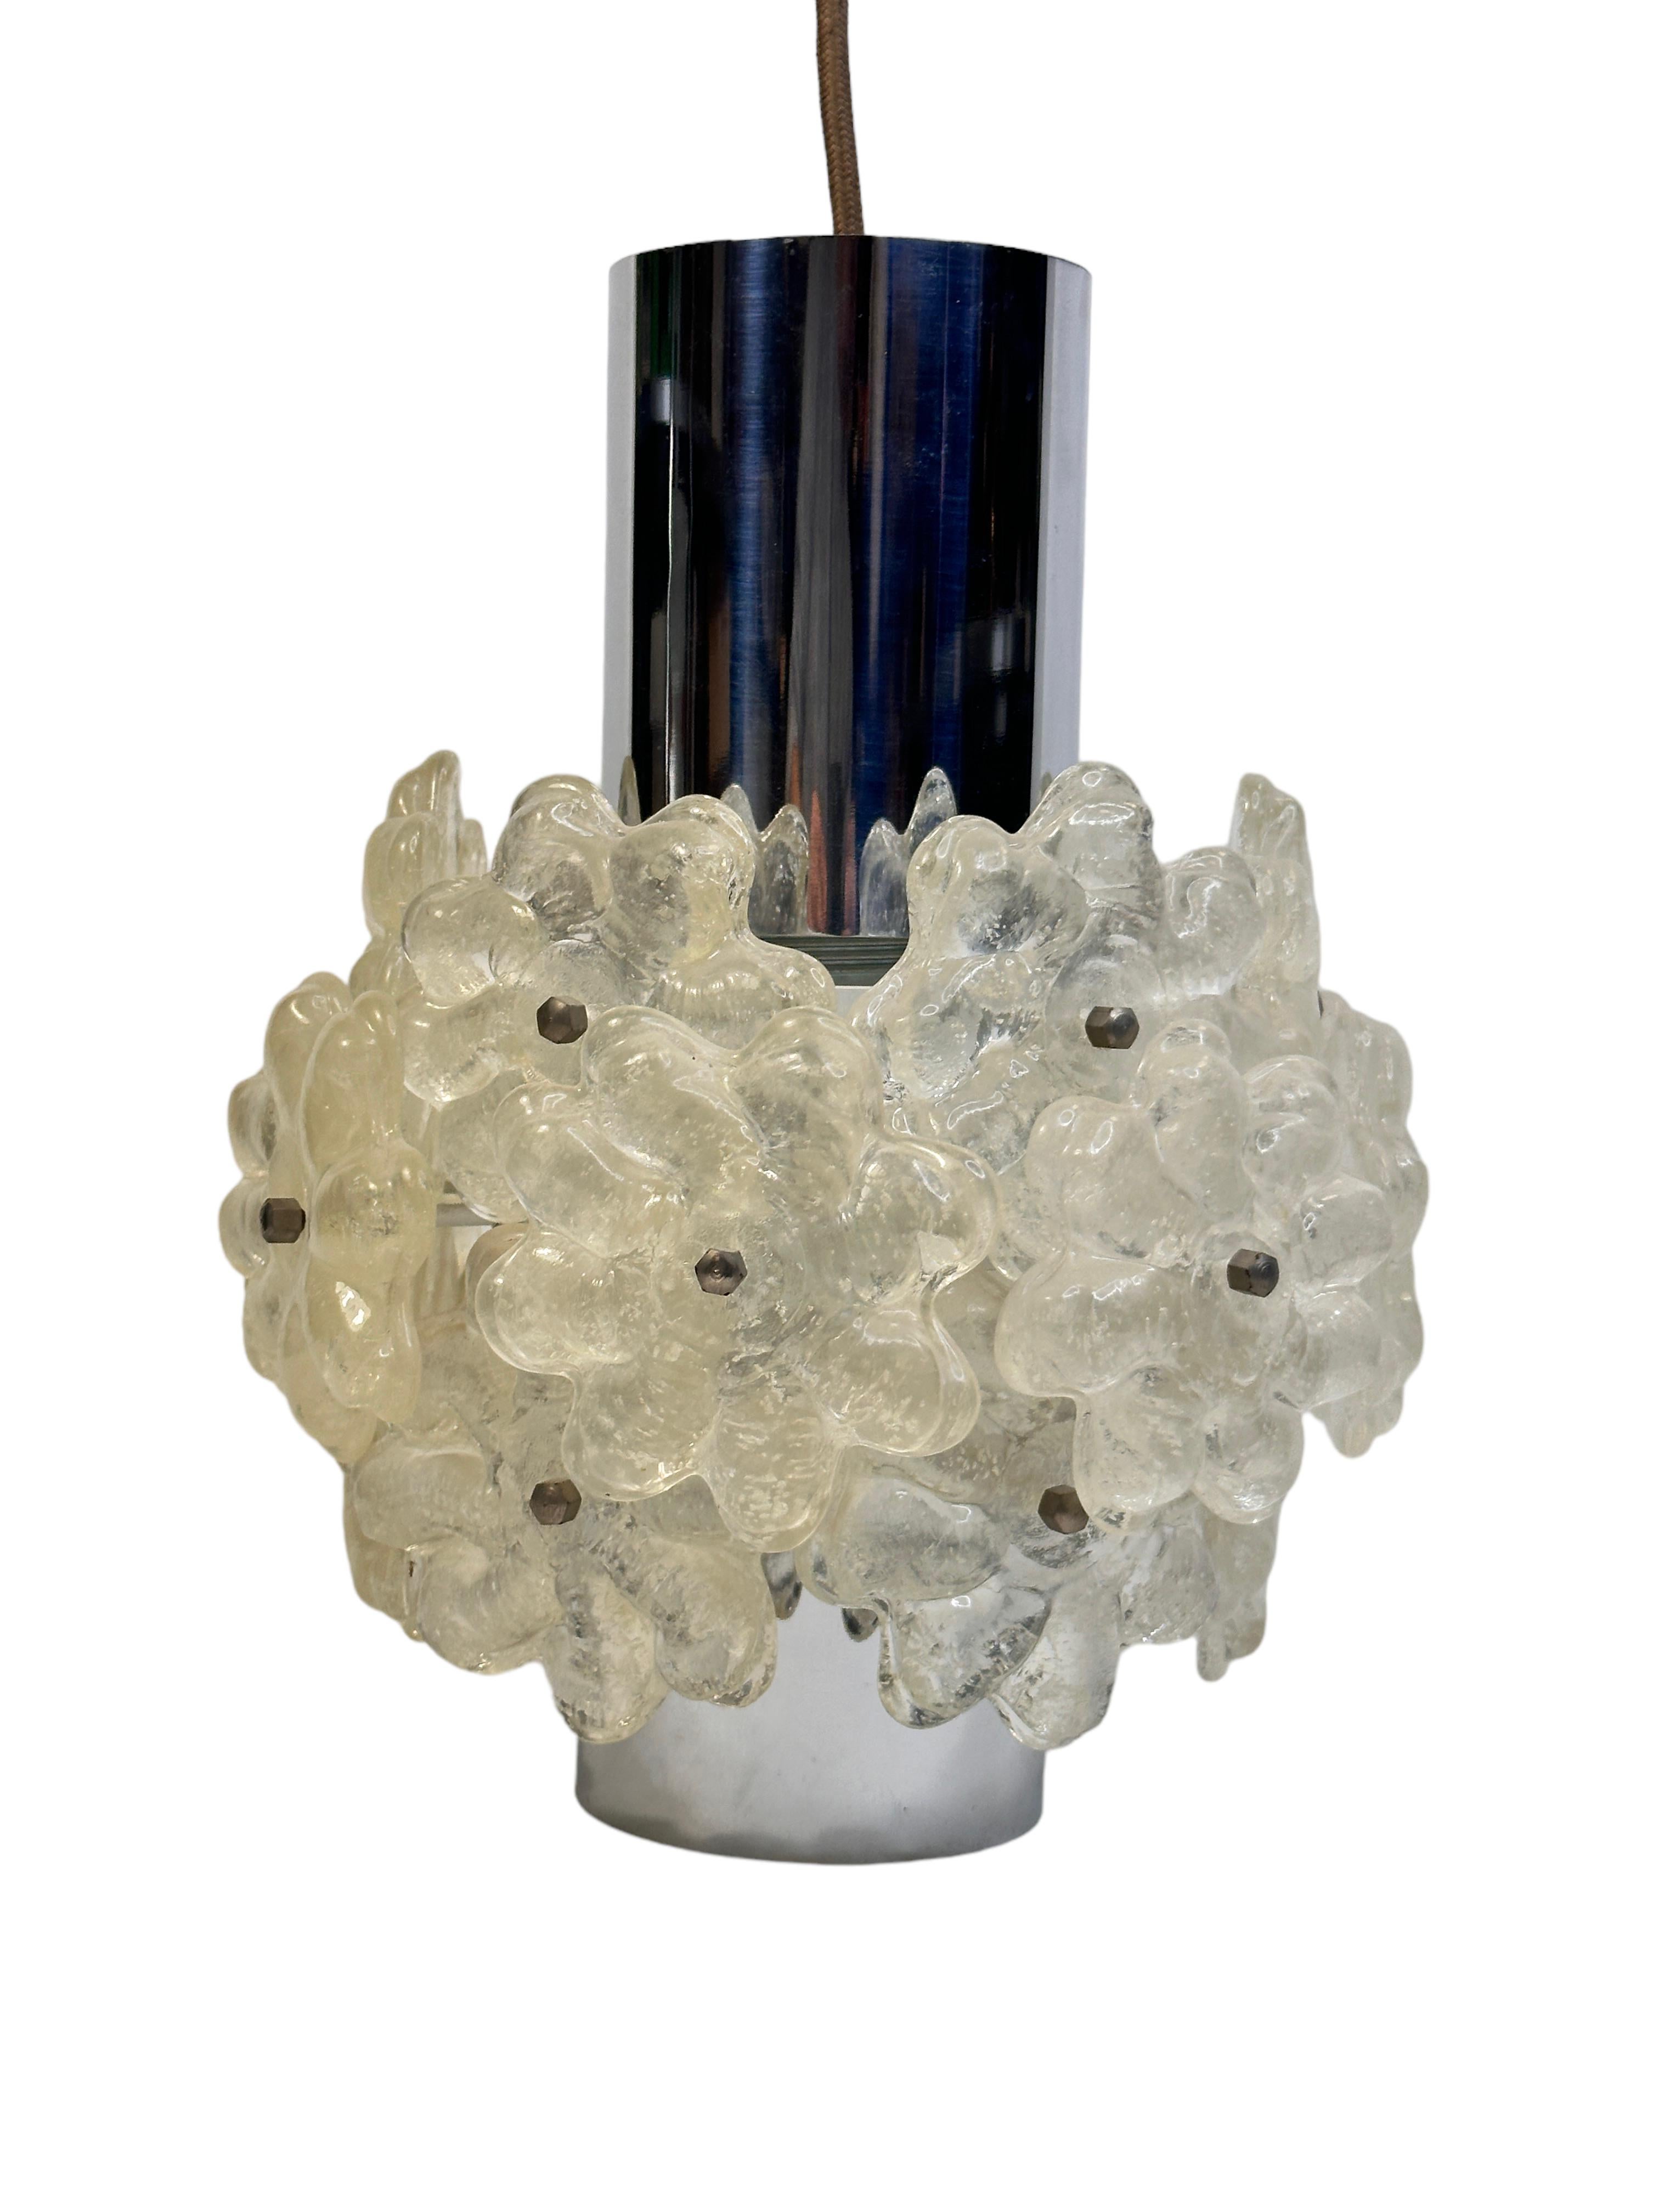 1 of 6 Chrome Pendant Fixture with Lucite Flower Clusters by Kalmar Austria 1960 For Sale 7